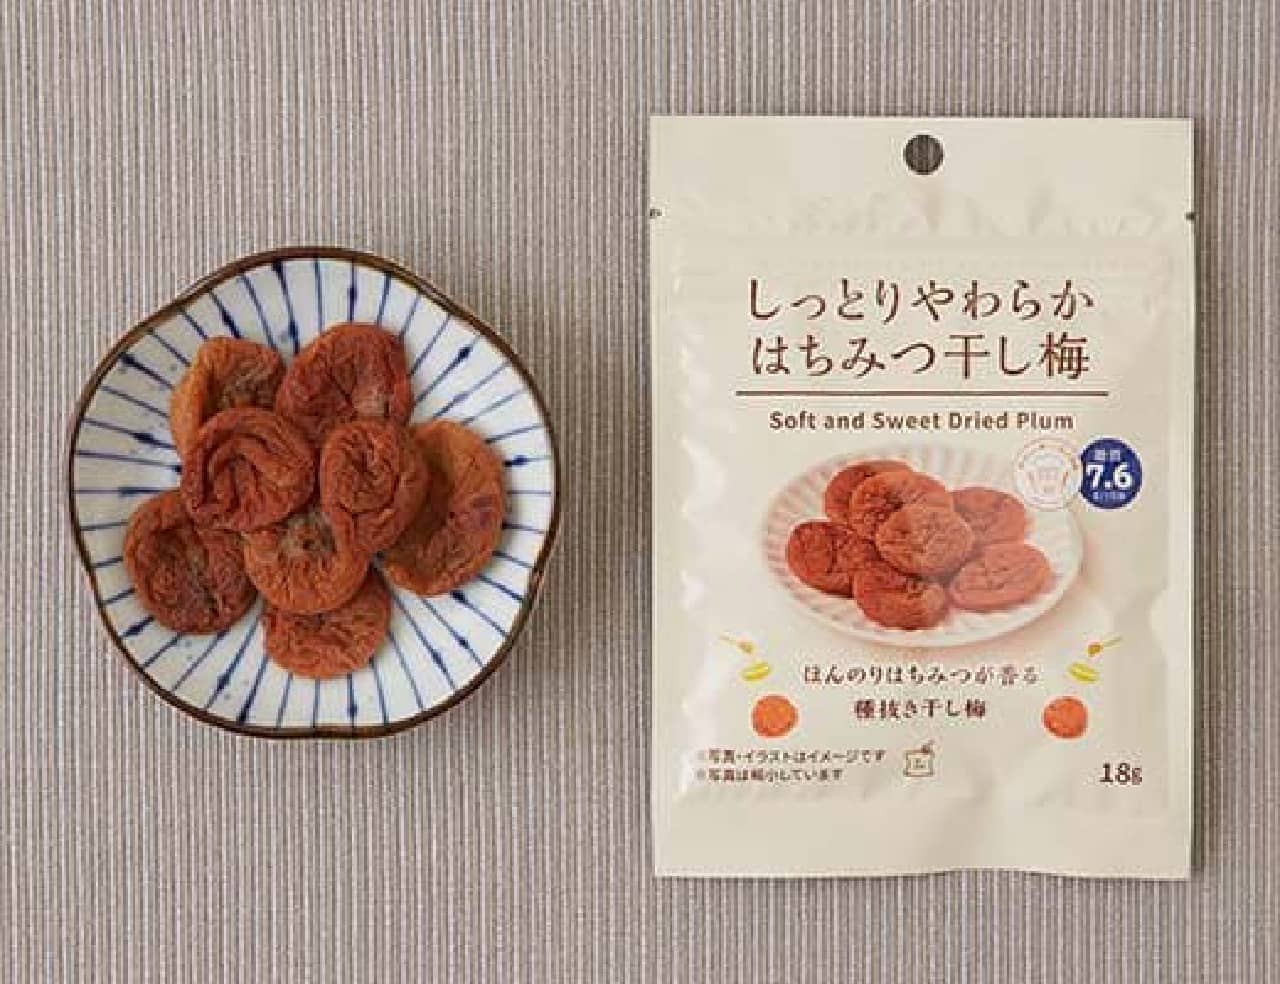 Lawson "moist and soft honey dried ume 18g".